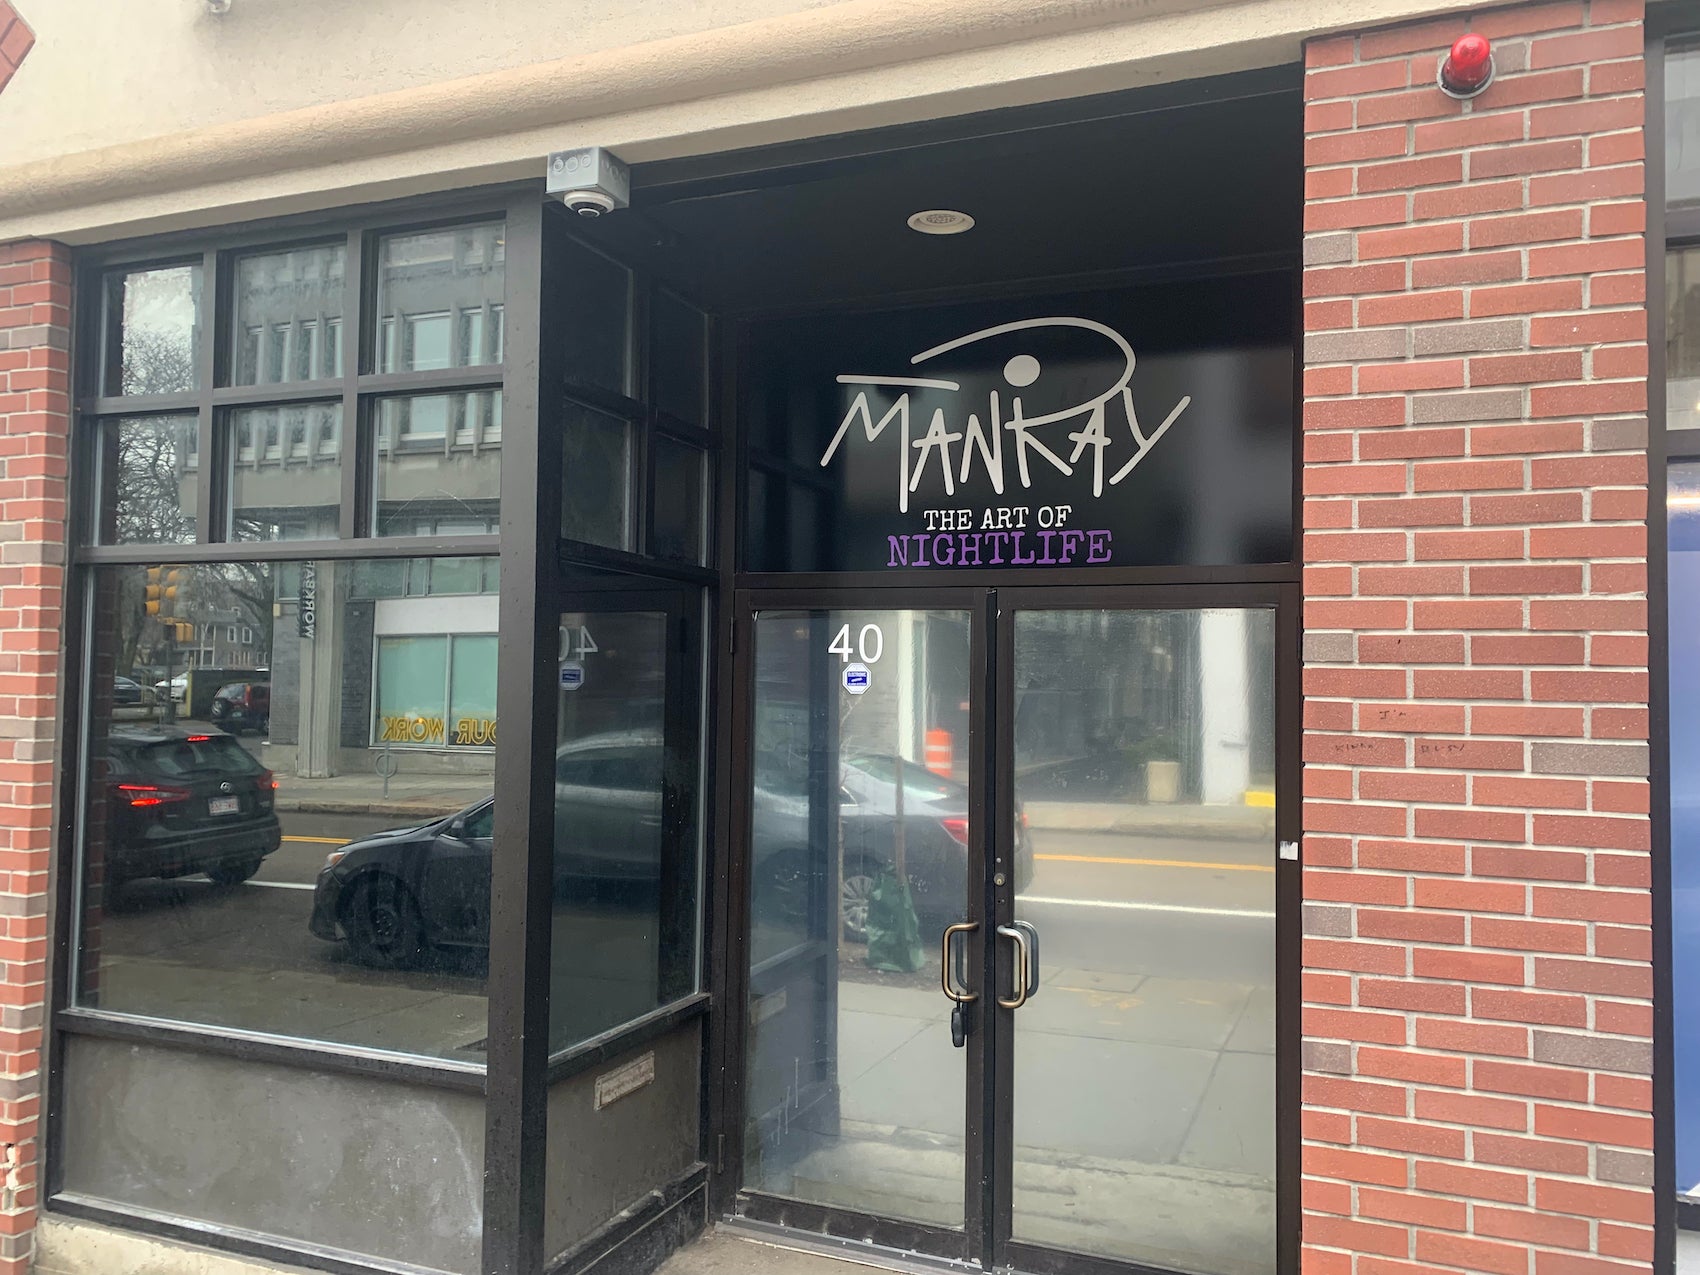 After closing in 2005, nightclub ManRay will reopen in Cambridge's Central Square at 40 Prospect Street.